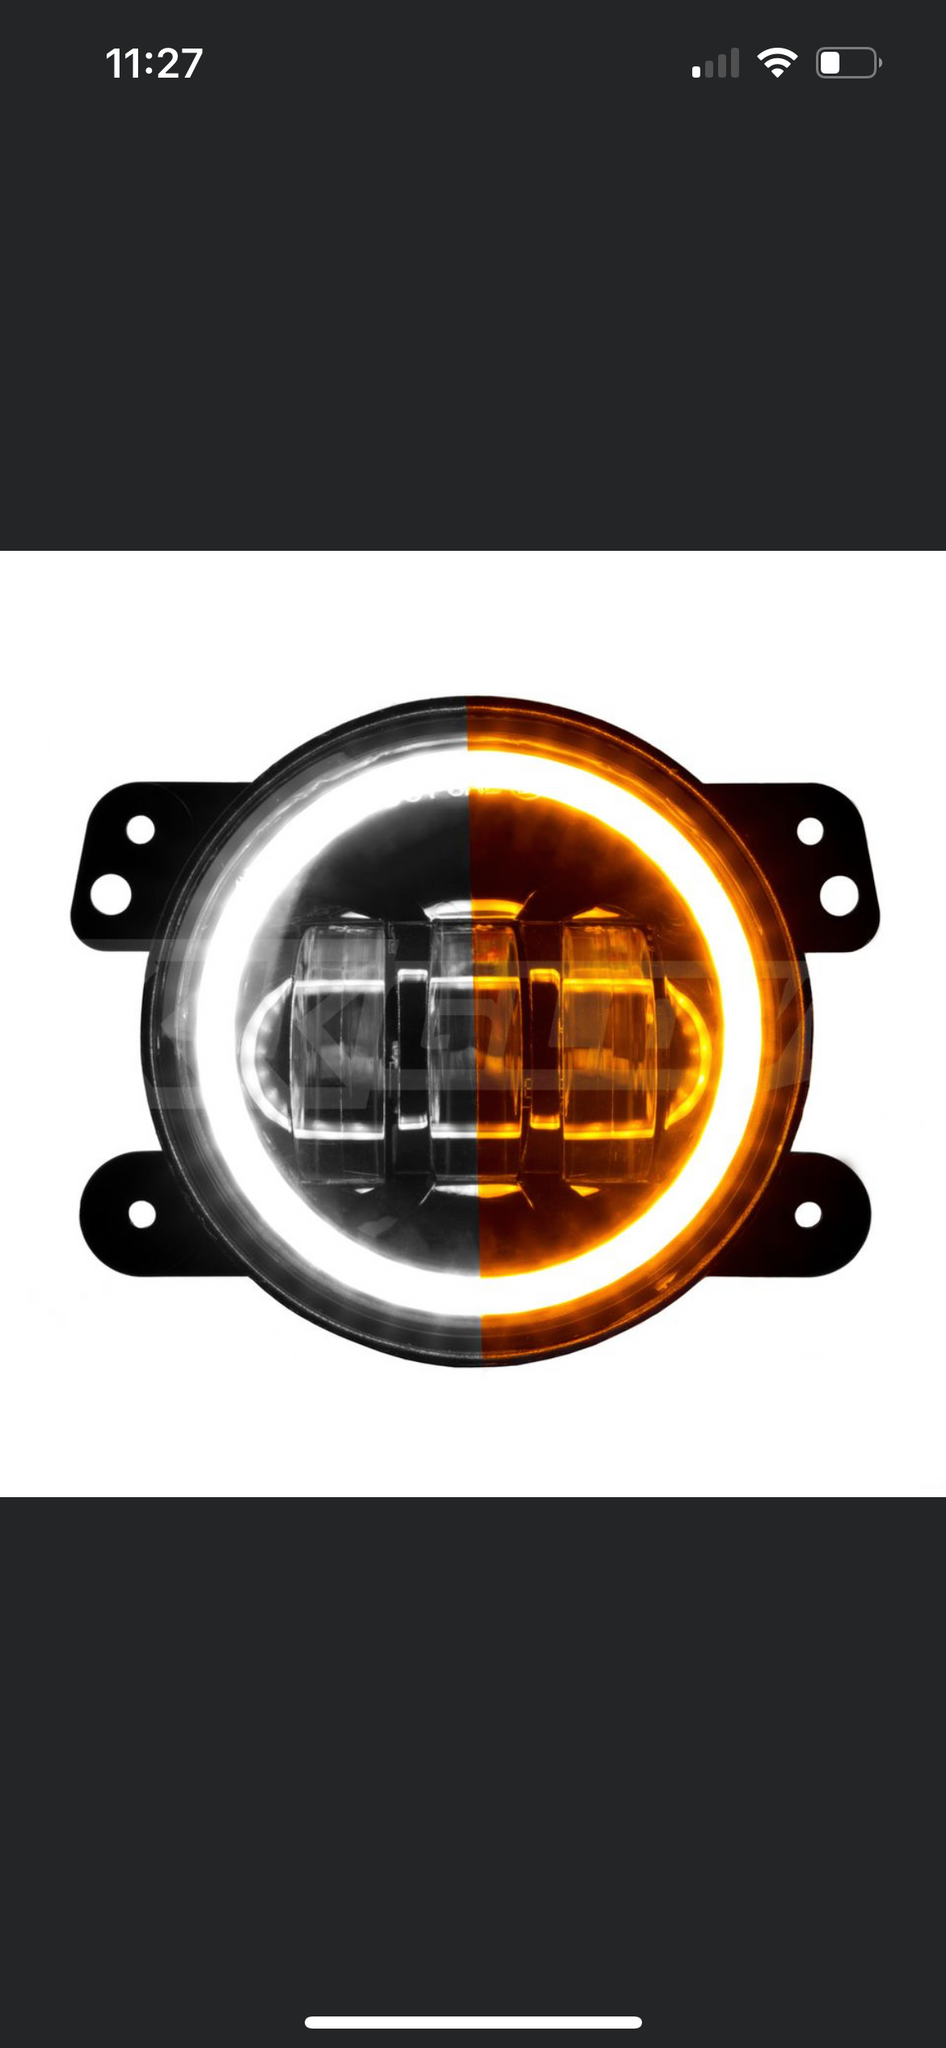 4" Fog Lights with Turn Signal and DRL